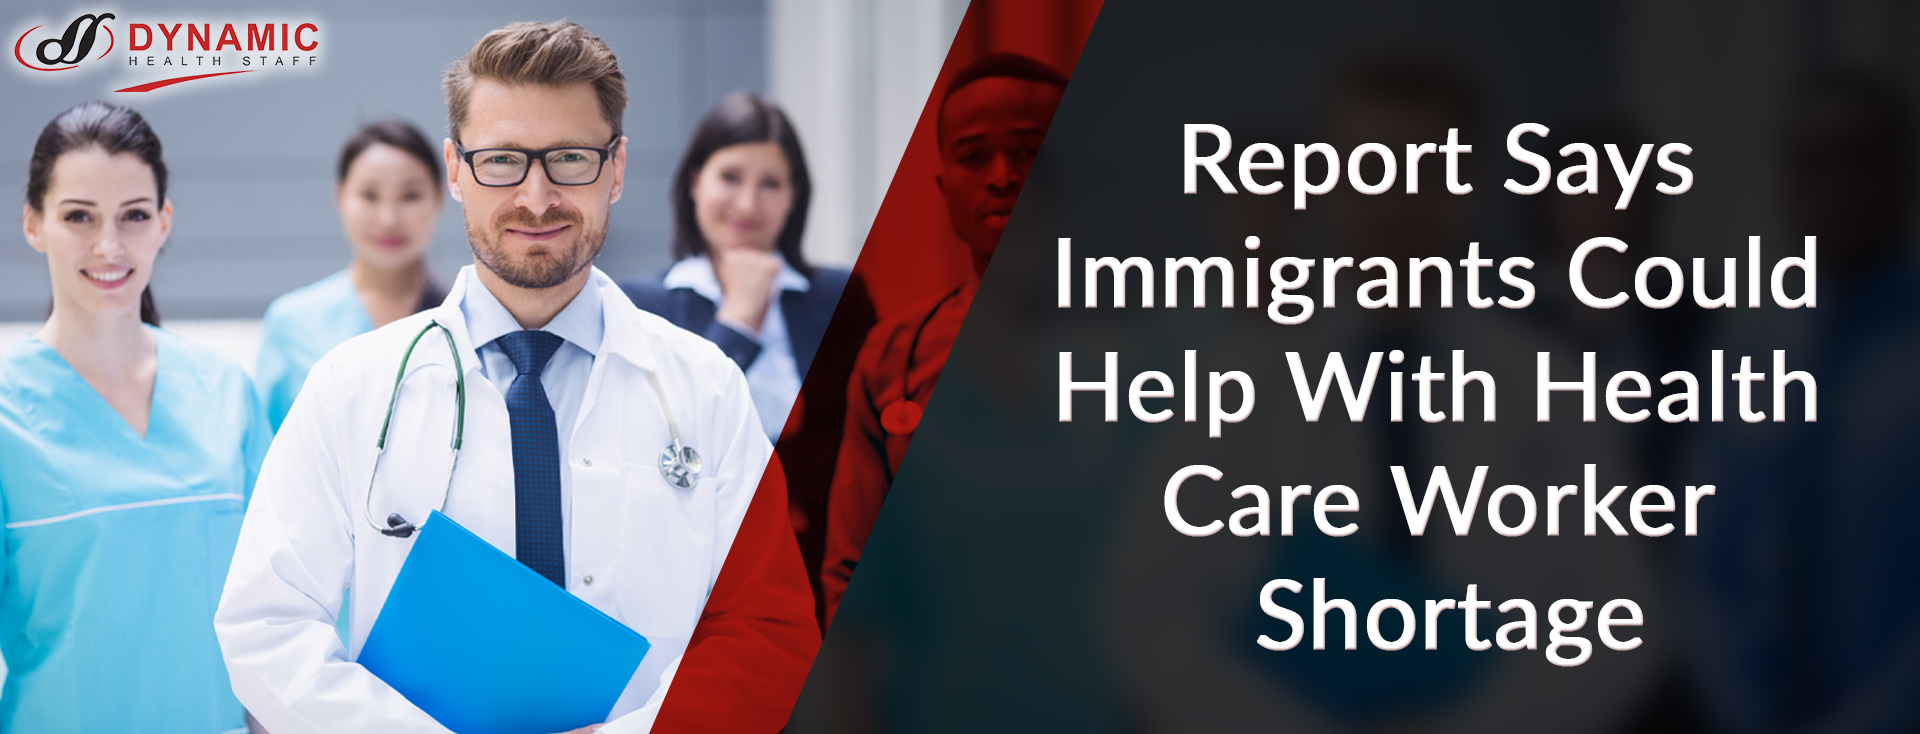 Report Says Immigrants Could Help With Health Care Worker Shortage